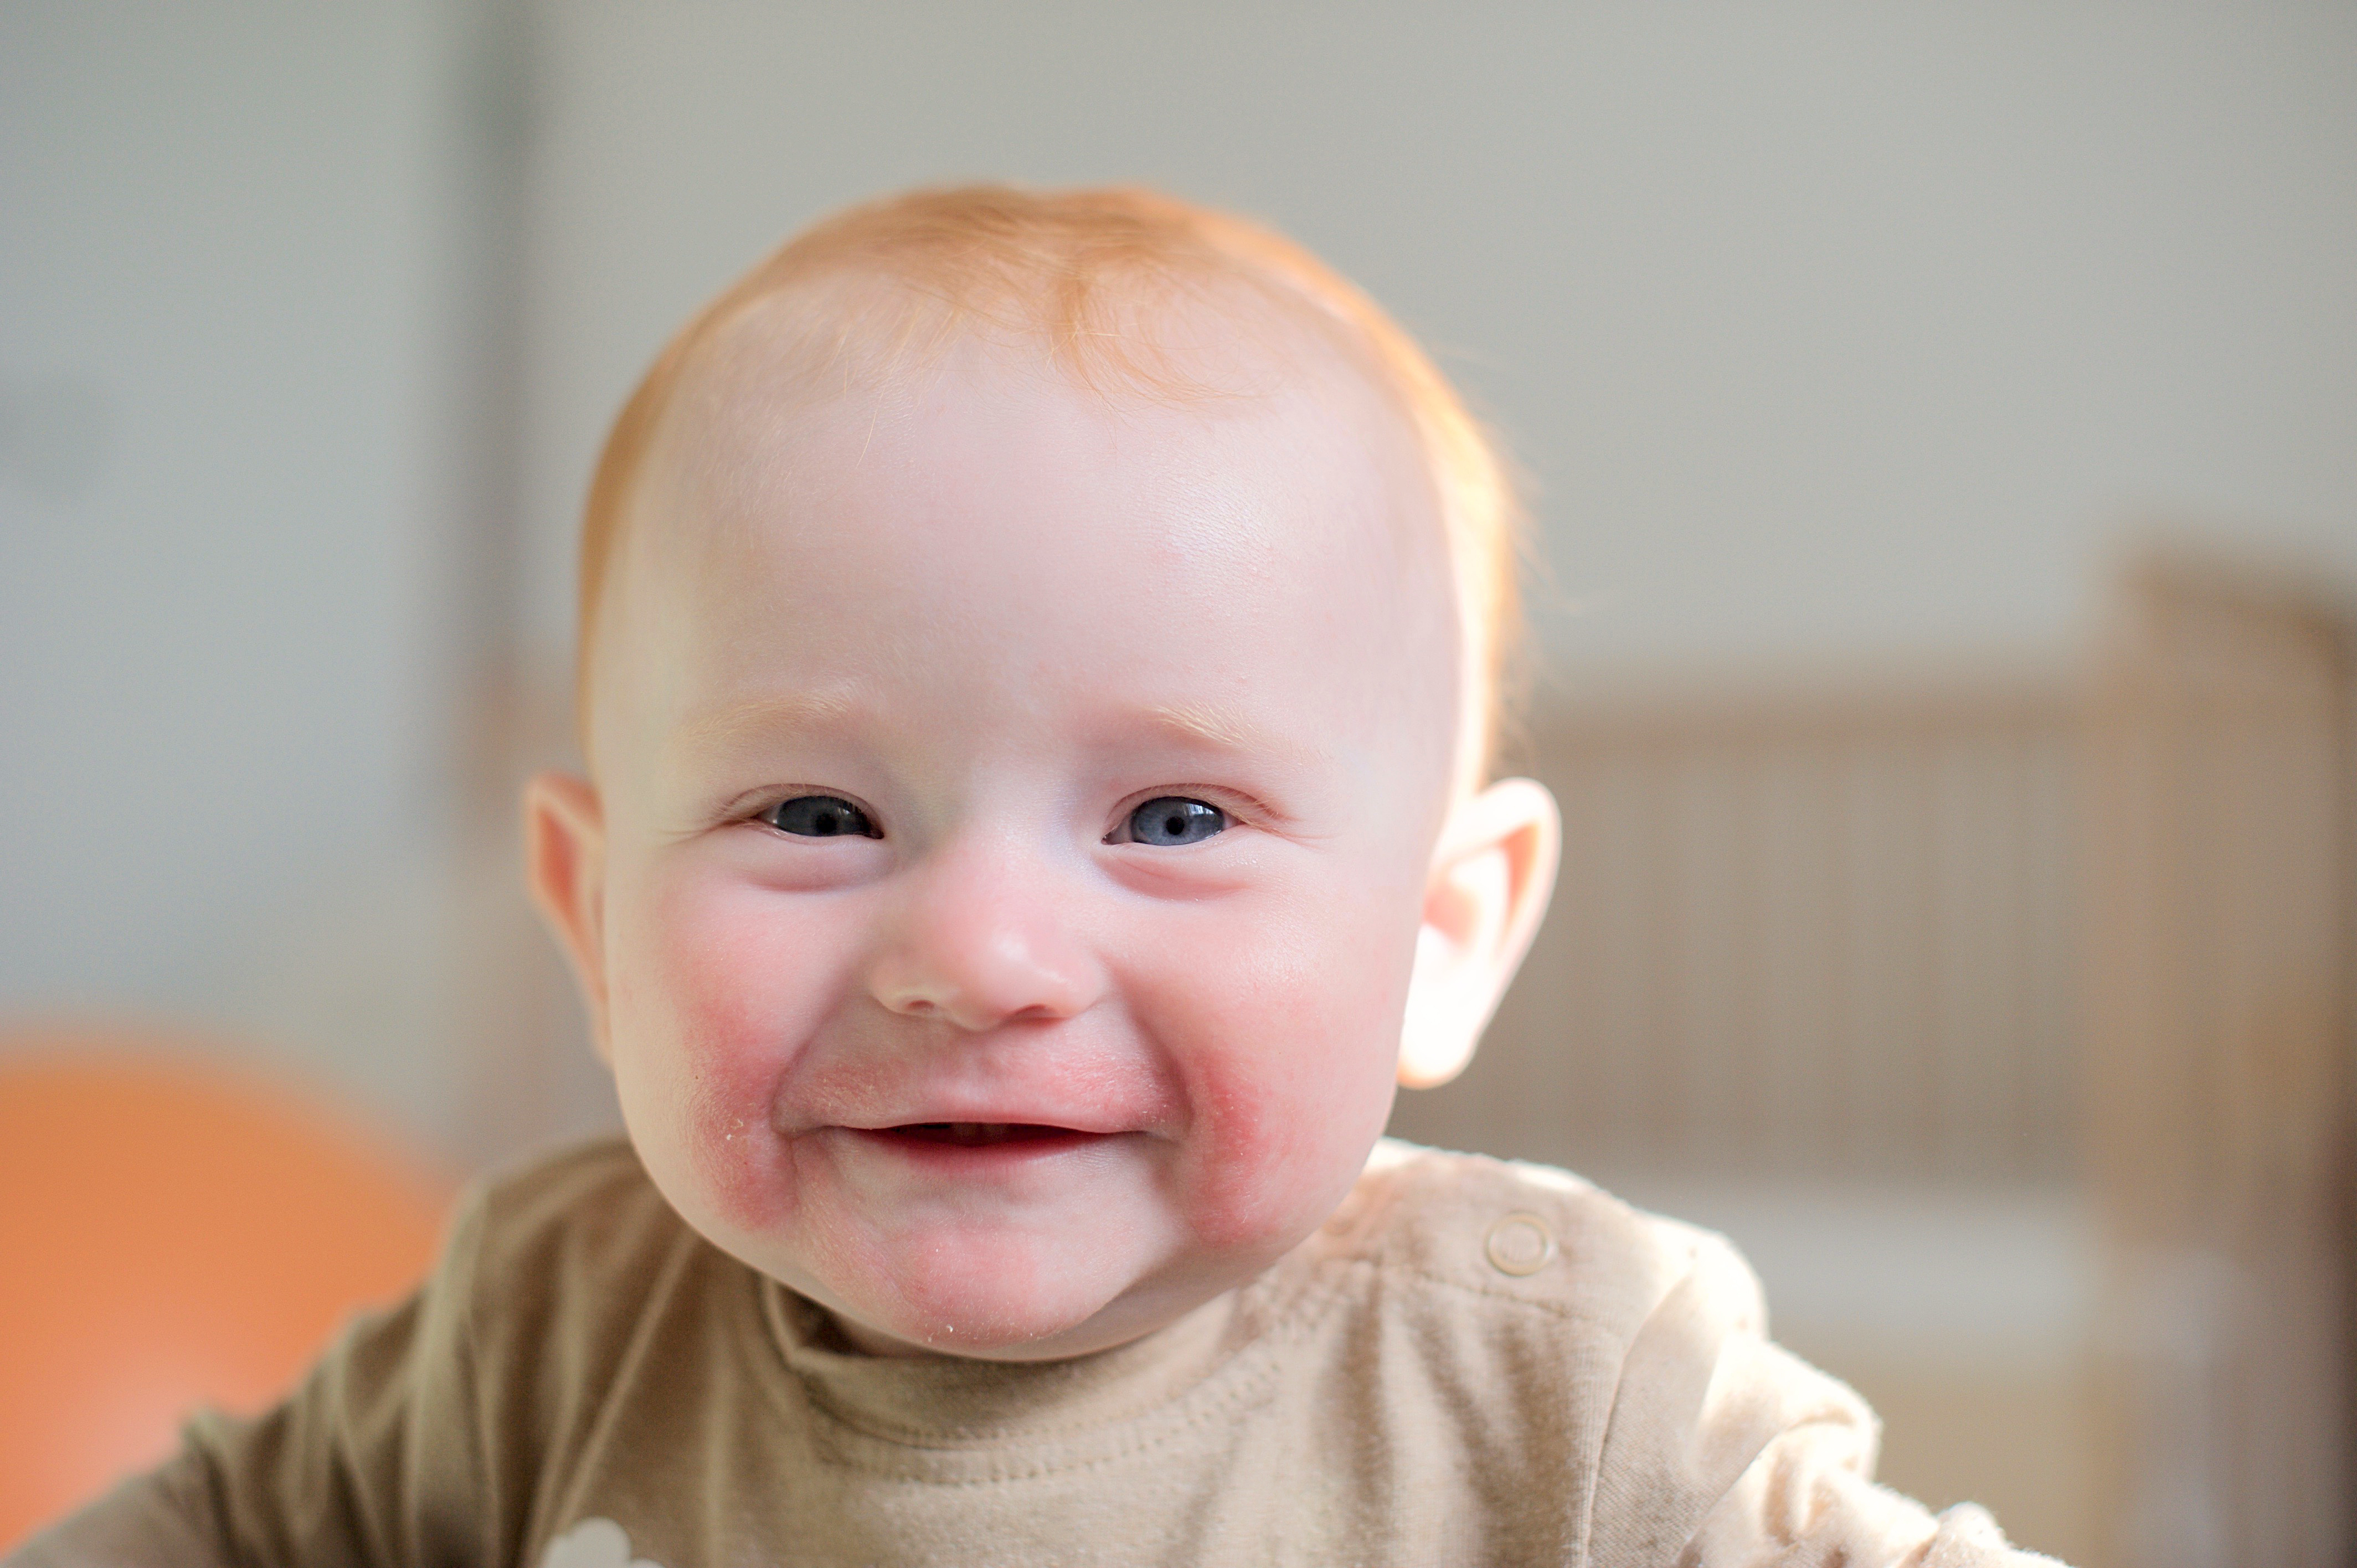 Beautiful redhead baby with atopic dermatitis smiling